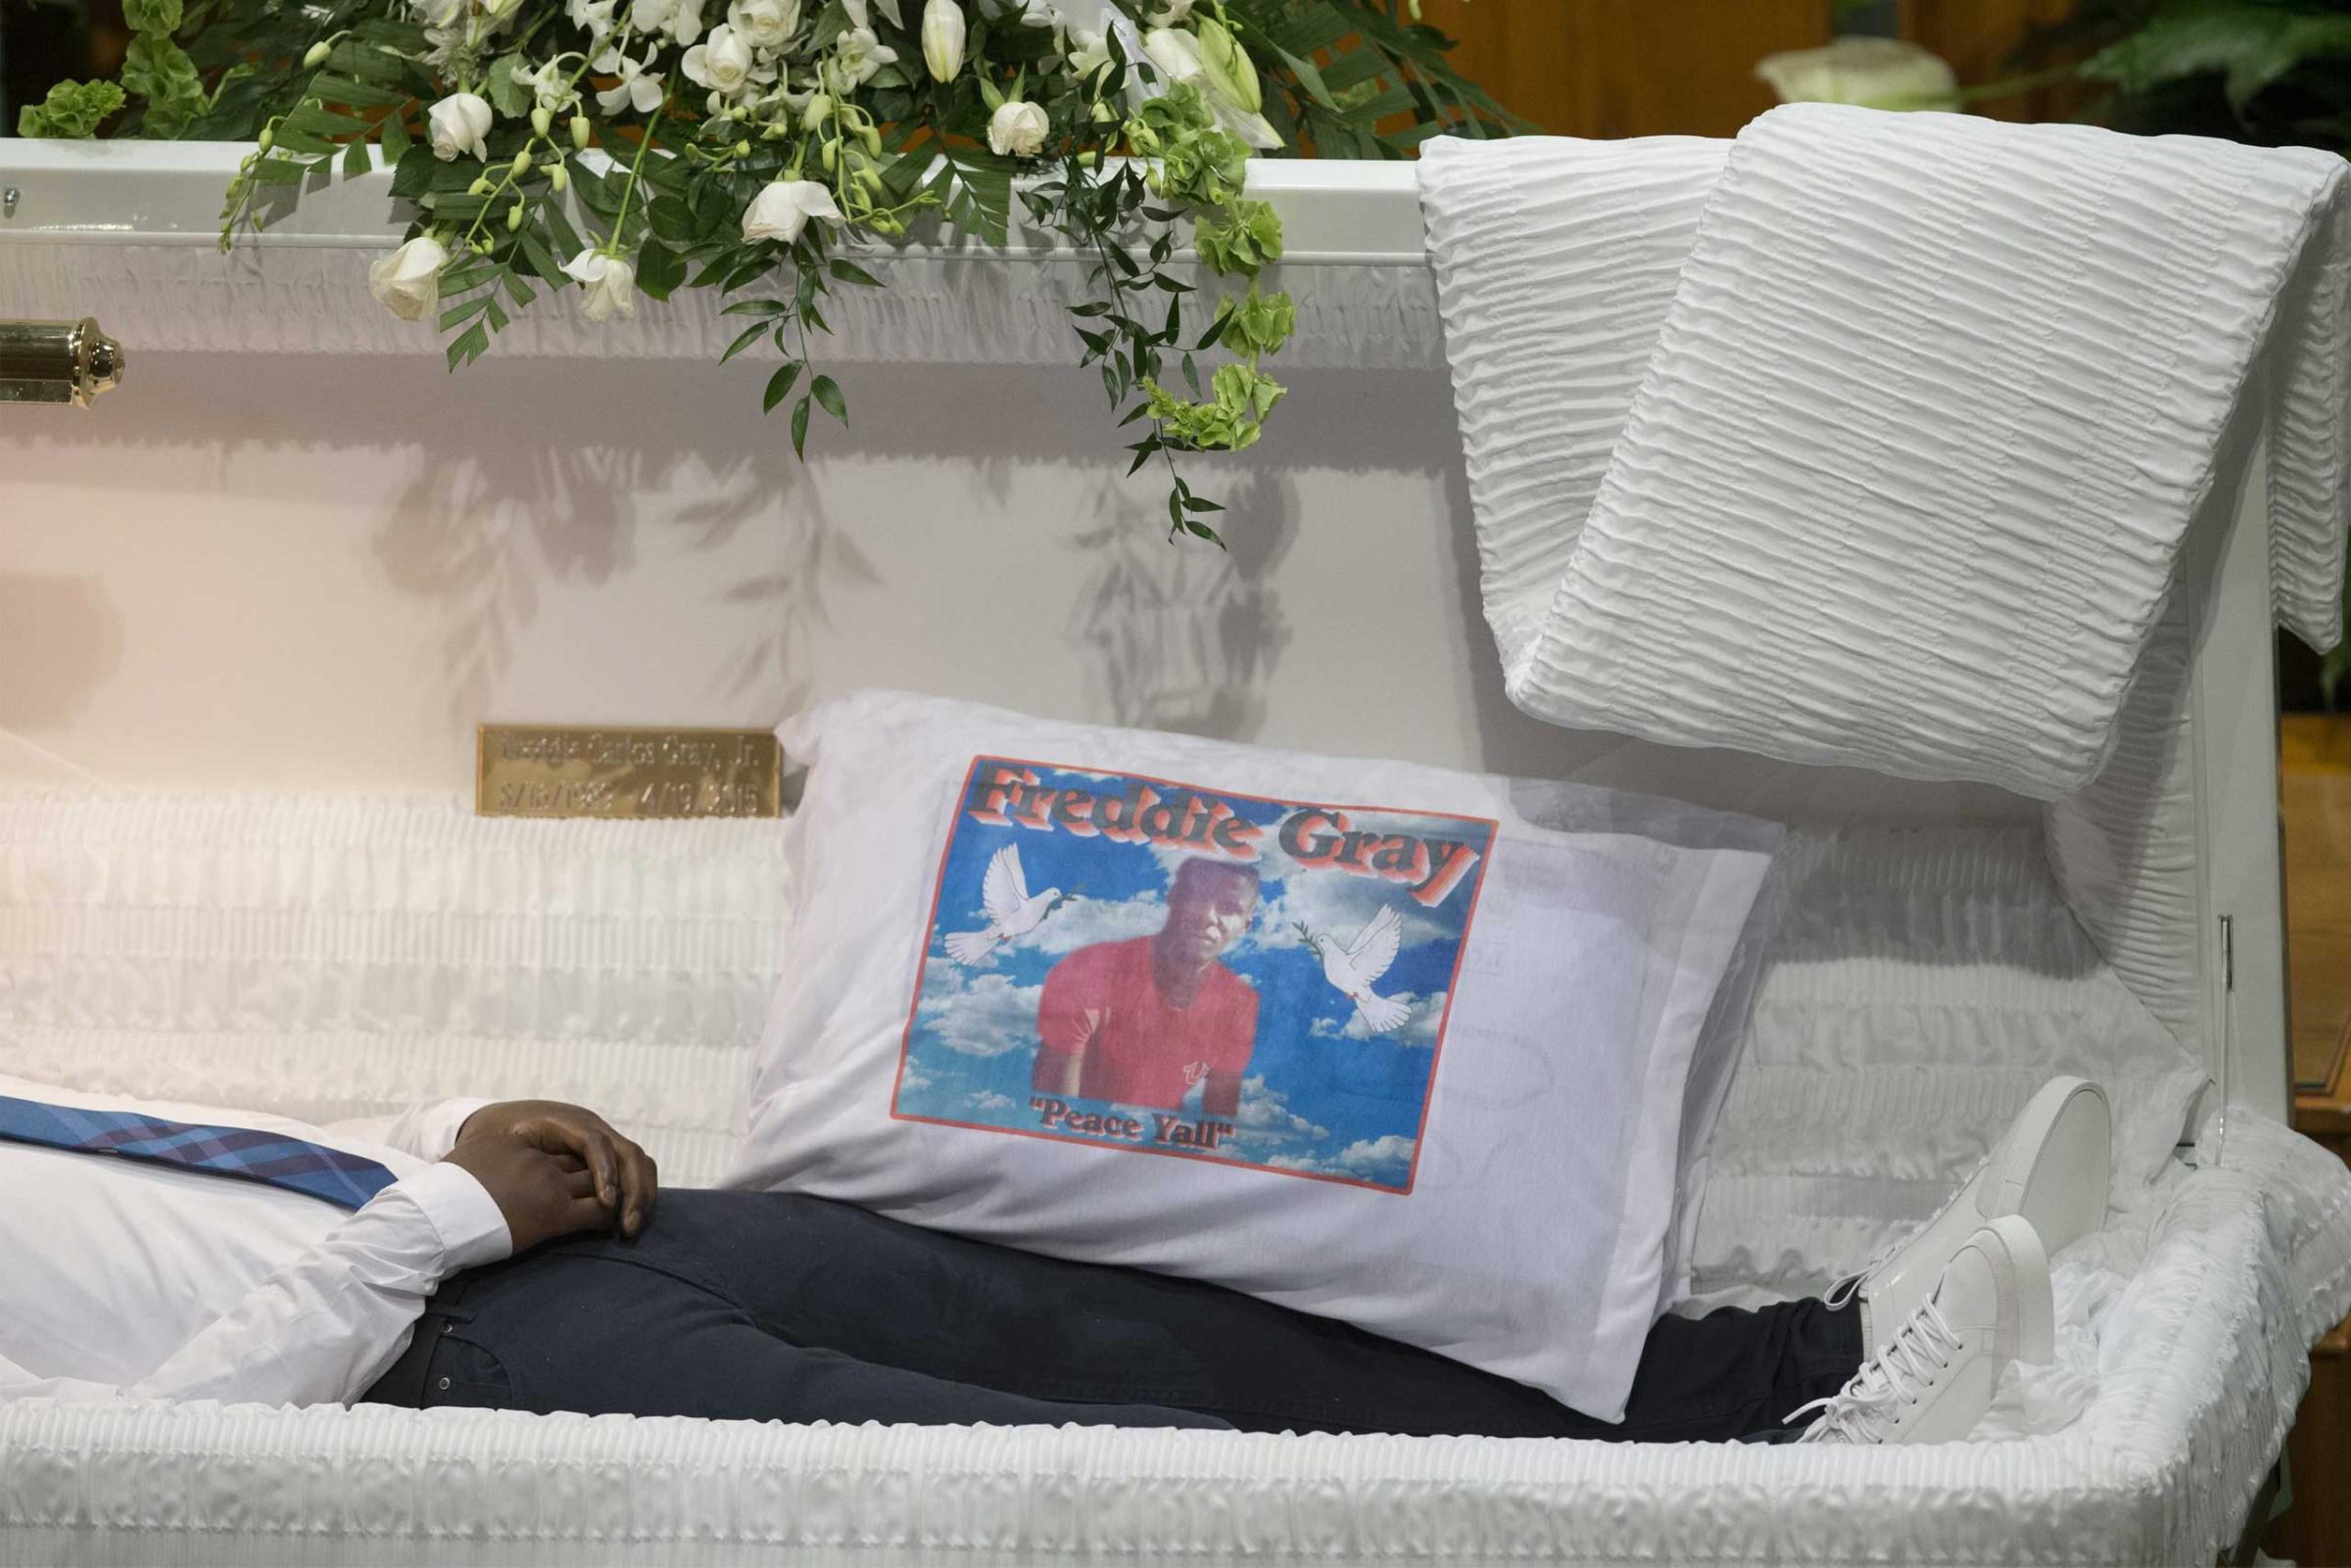 A pillow depicts the image of Freddie Gray inside his open casket during the funeral at New Shiloh Baptist Church in Baltimore on April 27, 2015.